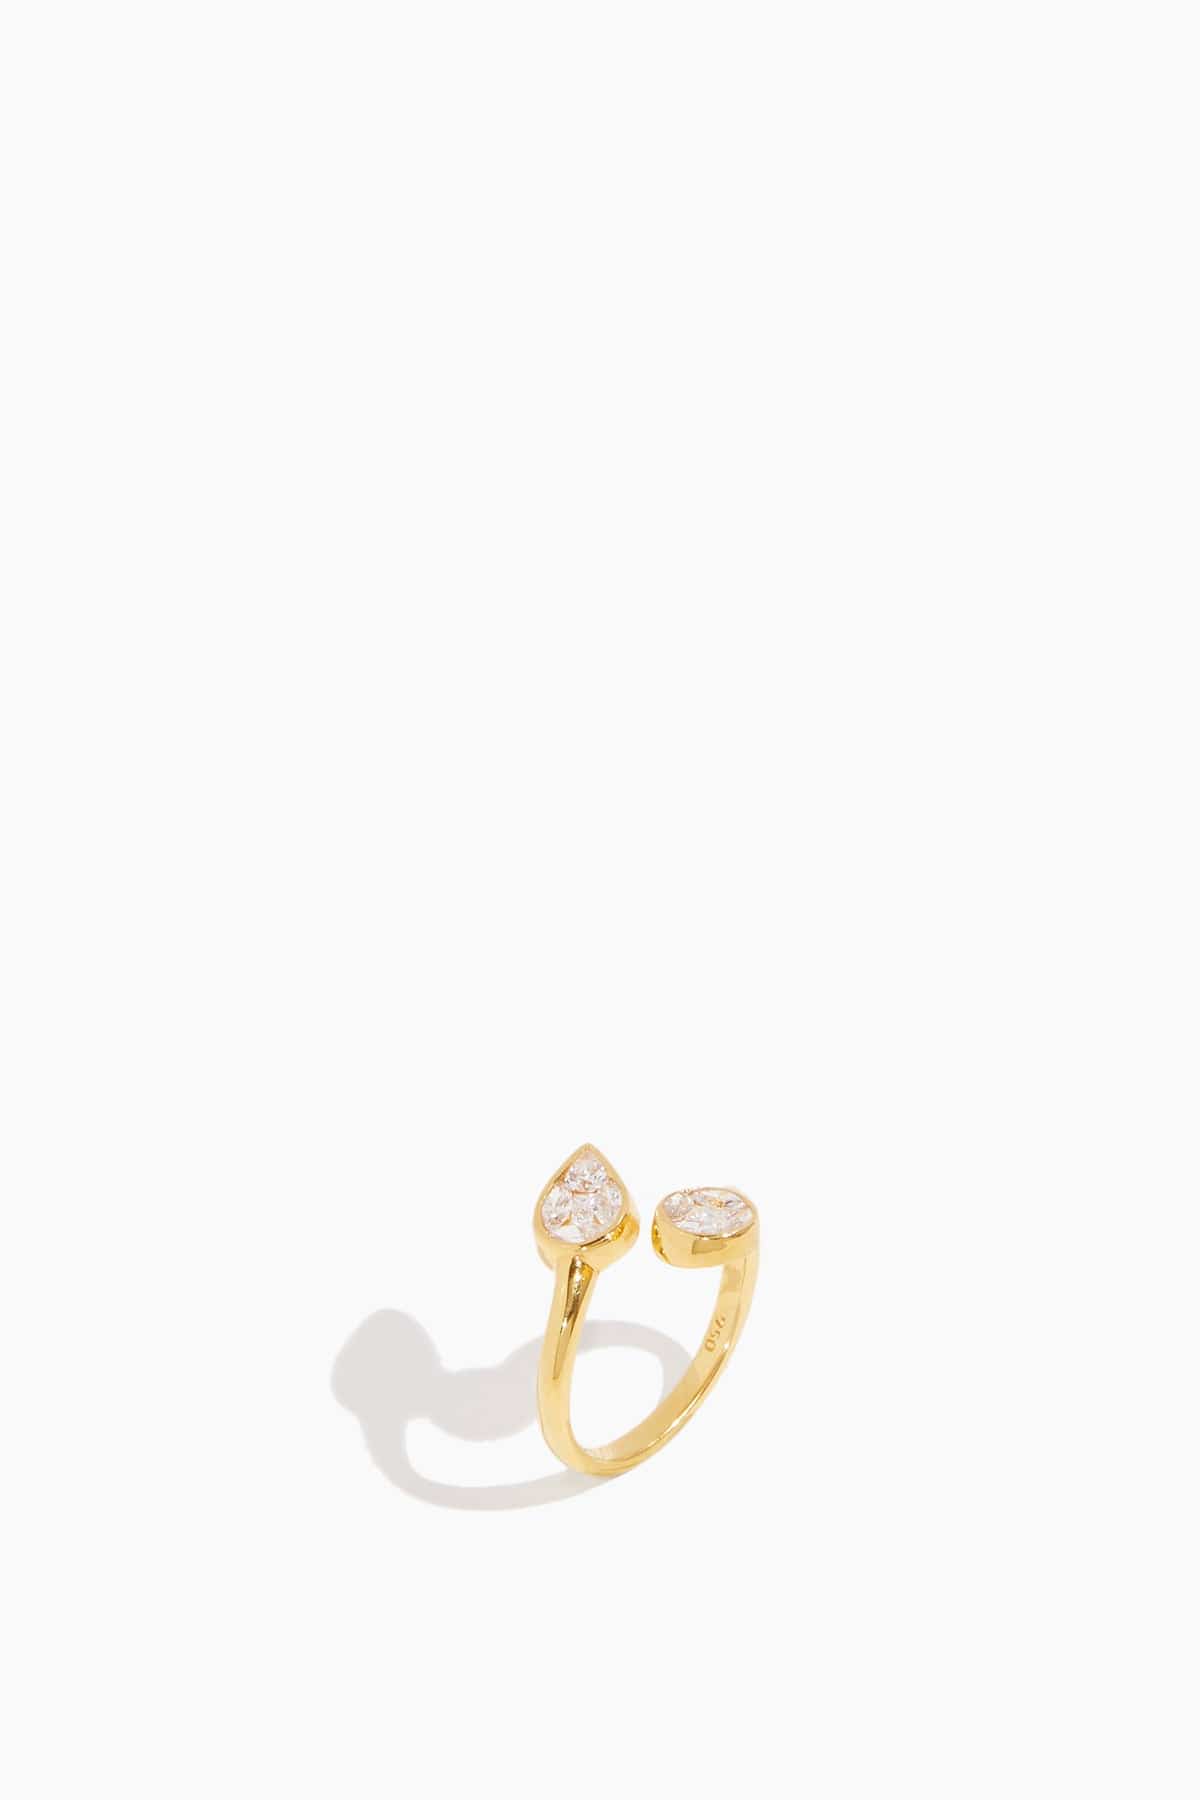 Stoned Fine Jewelry Rings Wrapped Leaf Ring in 18k Yellow Gold Stoned Fine Jewelry Wrapped Leaf Ring in 18k Yellow Gold